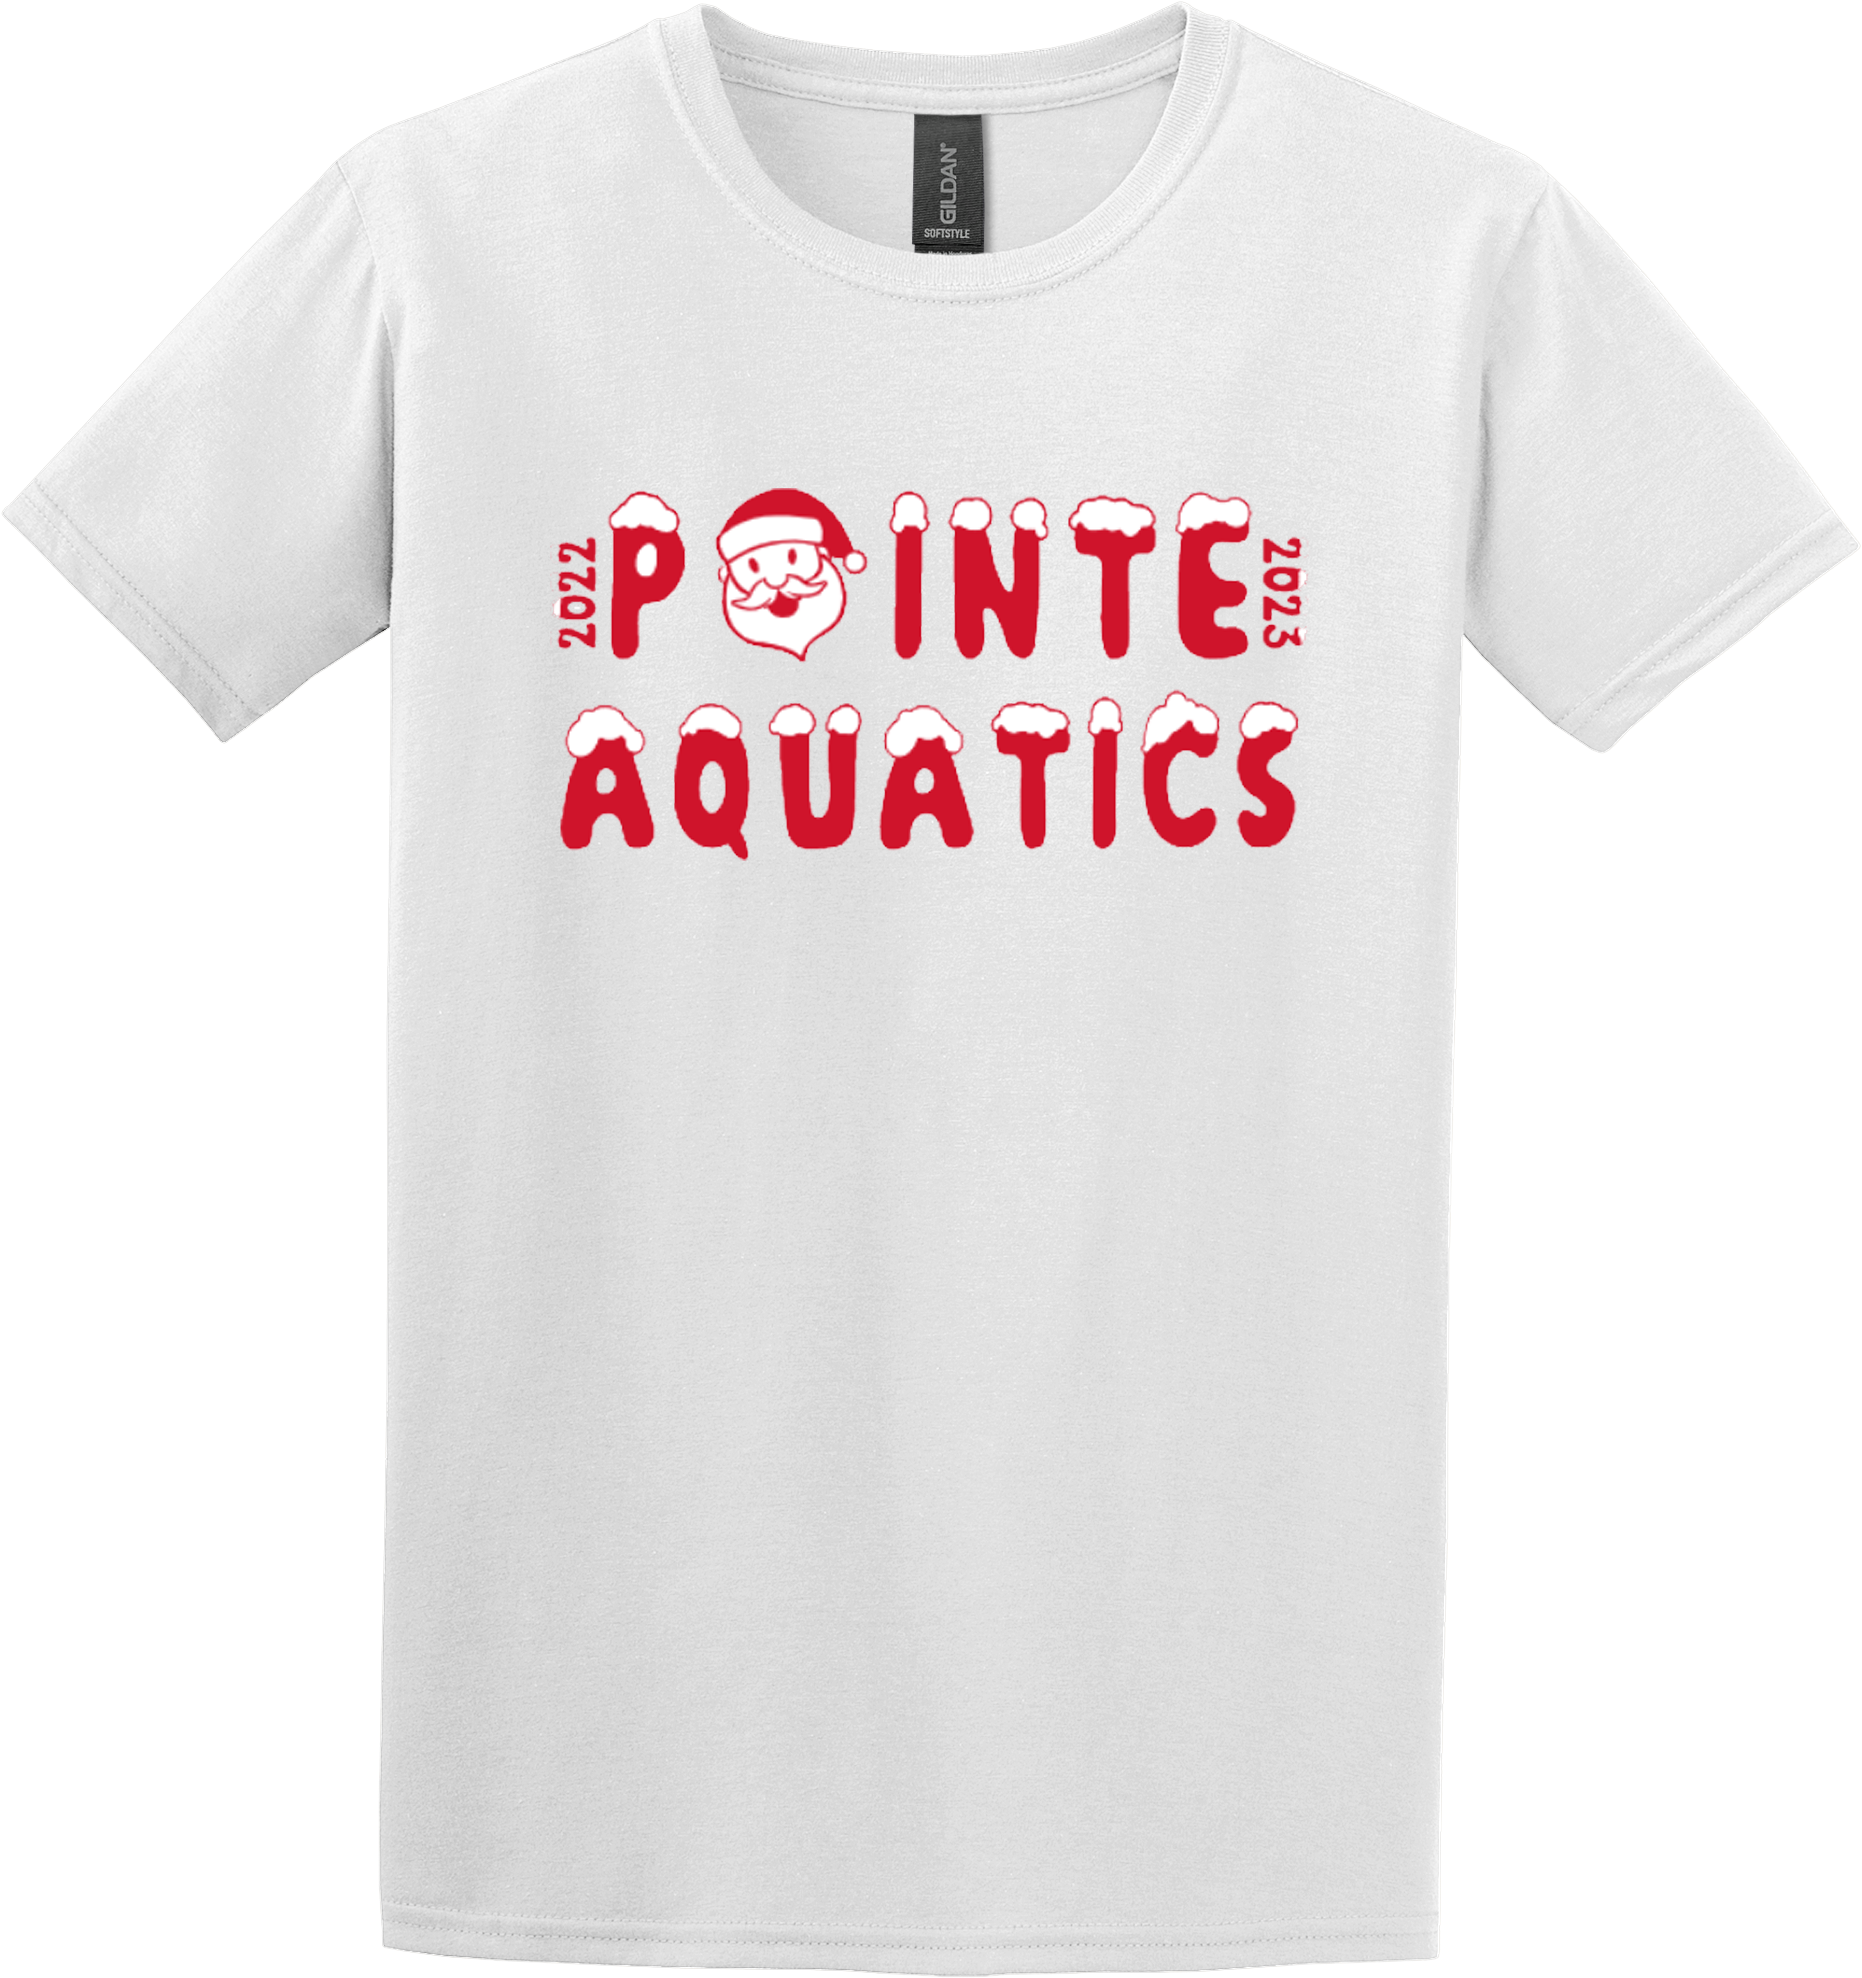 A white t-shirt with red textDescription automatically generated